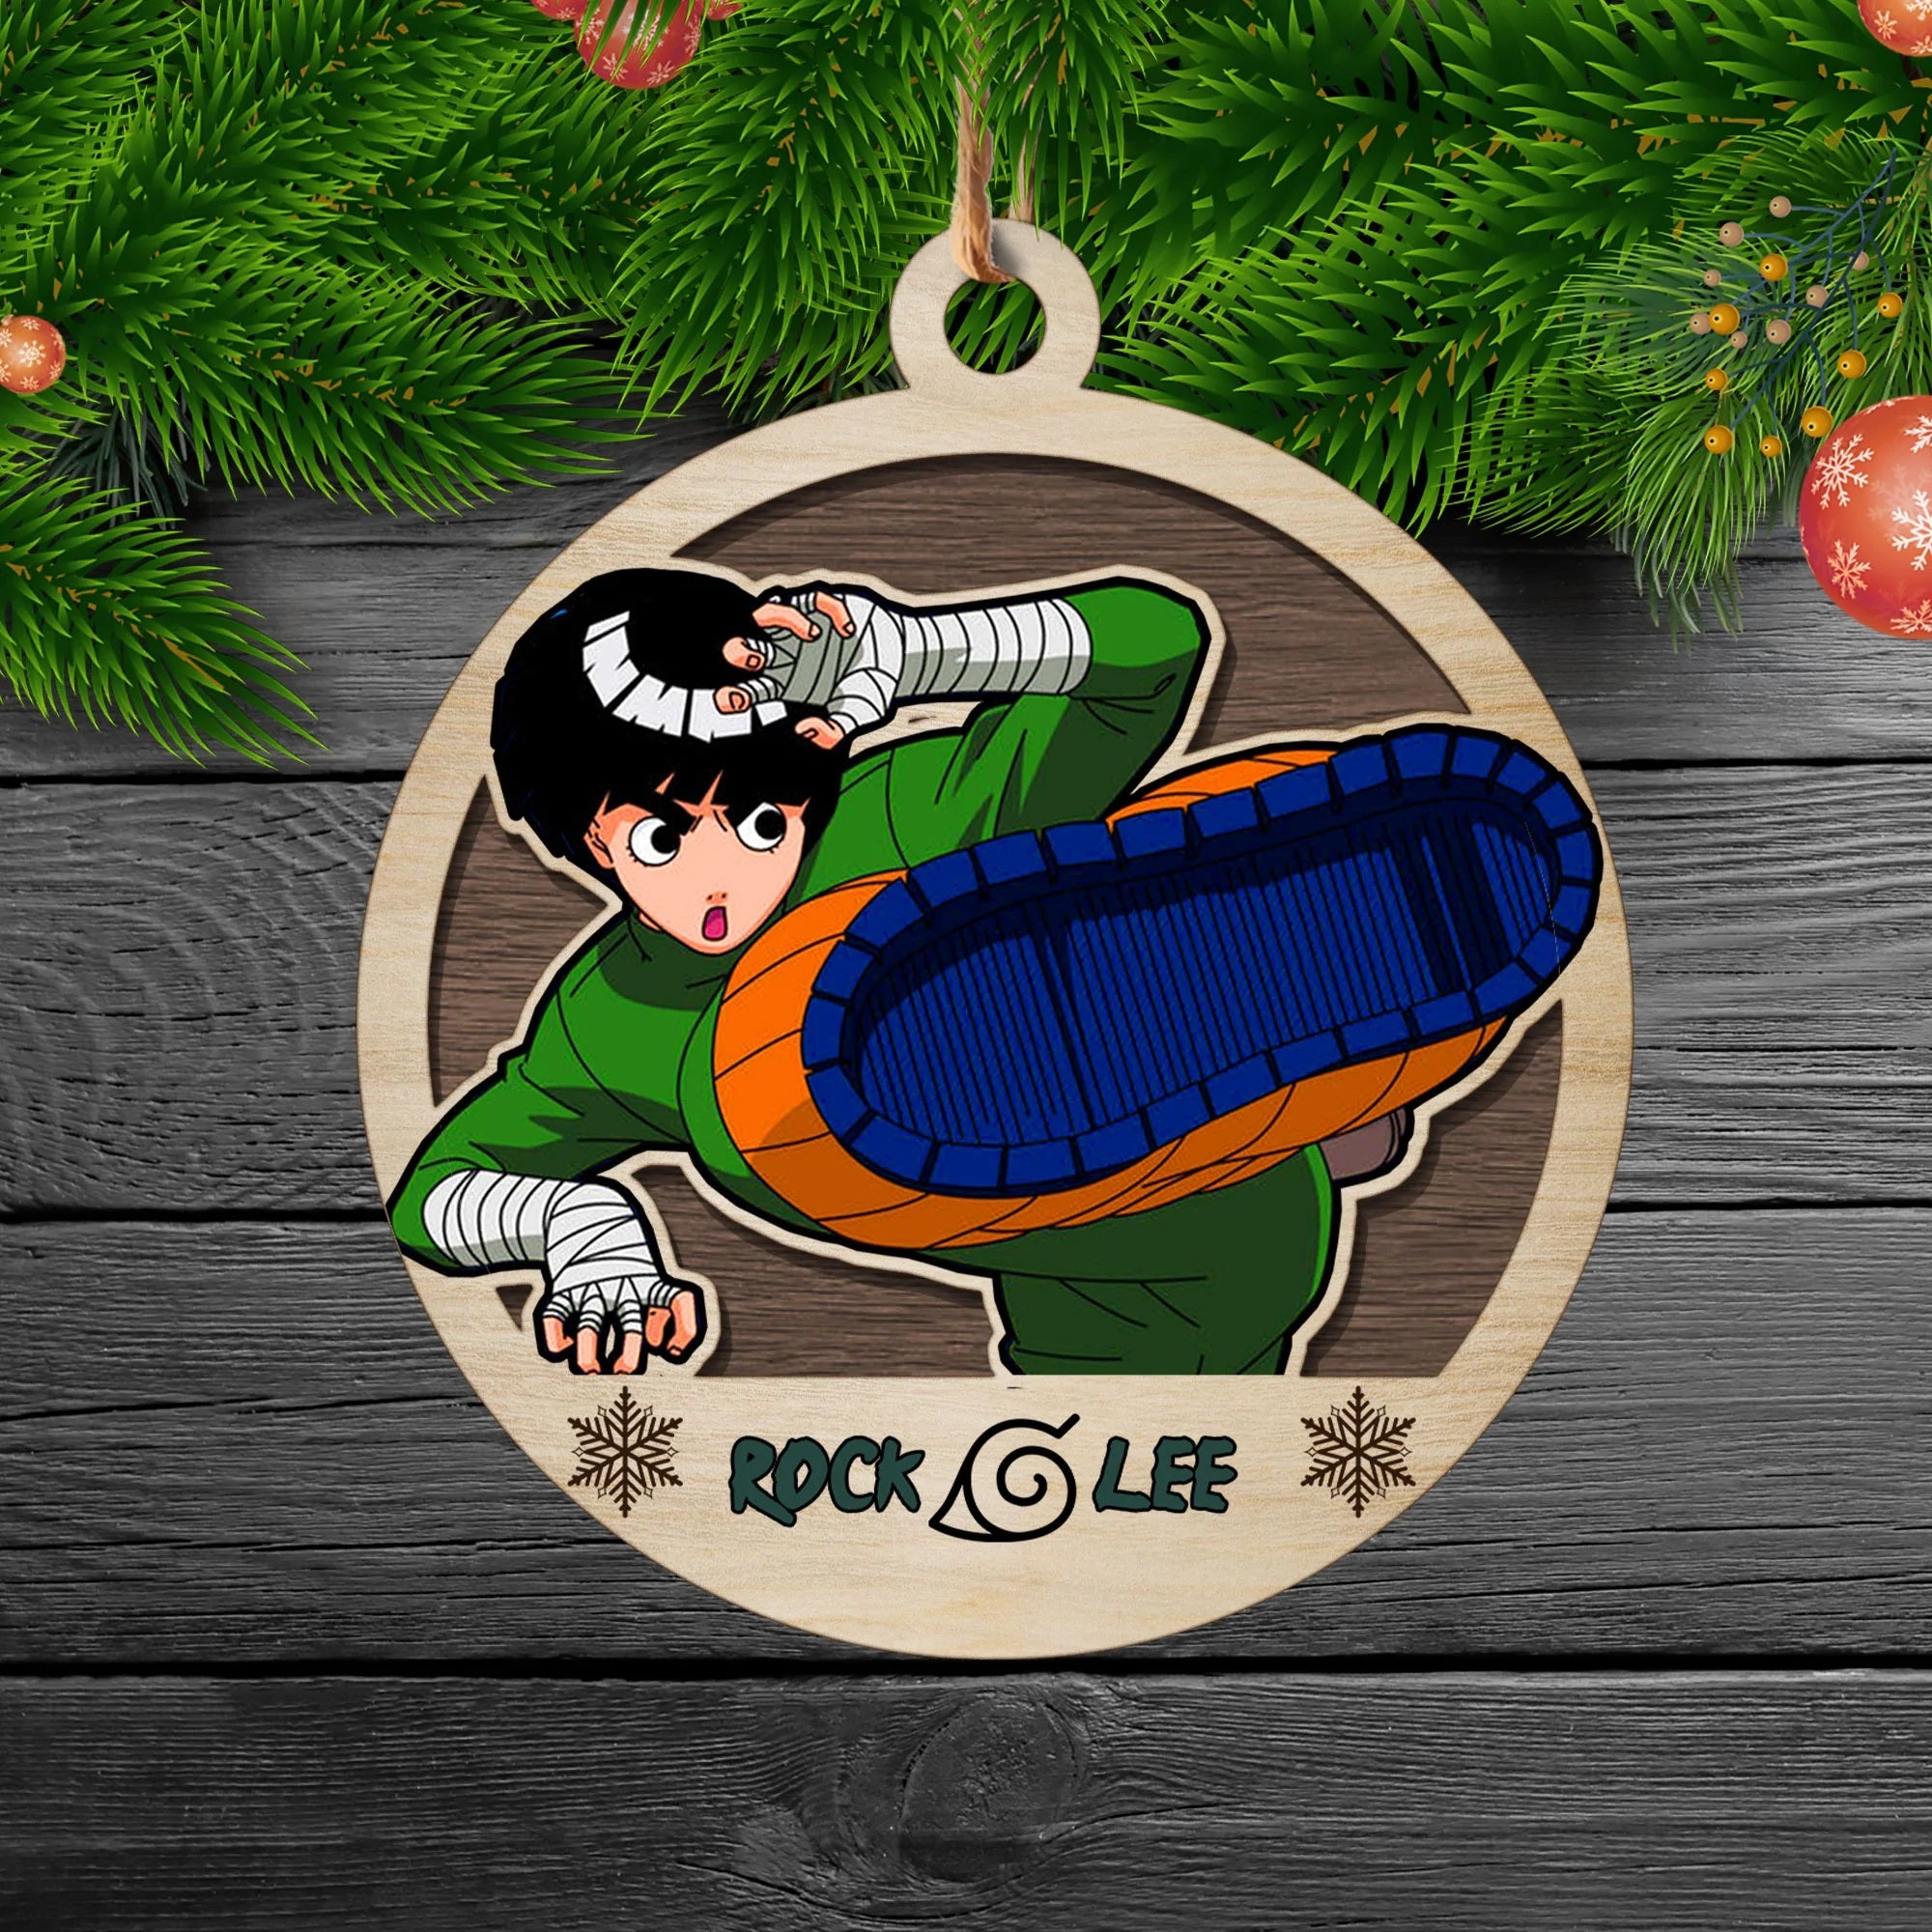 Naruto Rock Lee Christmas Double Layered Colored Wood Ornament Nearkii